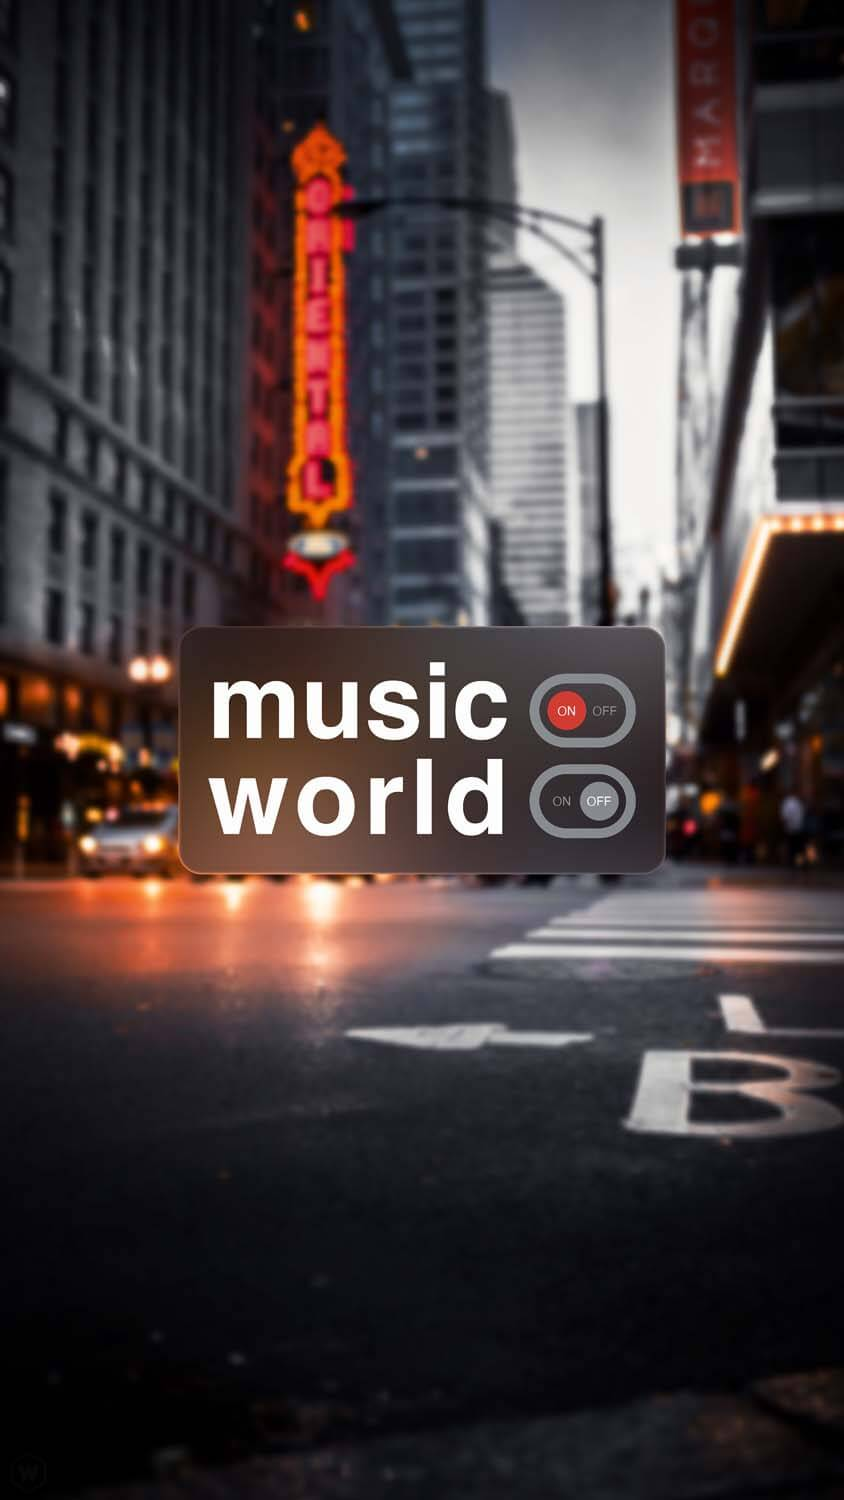 Music ON World OFF IPhone Wallpaper HD  IPhone Wallpapers